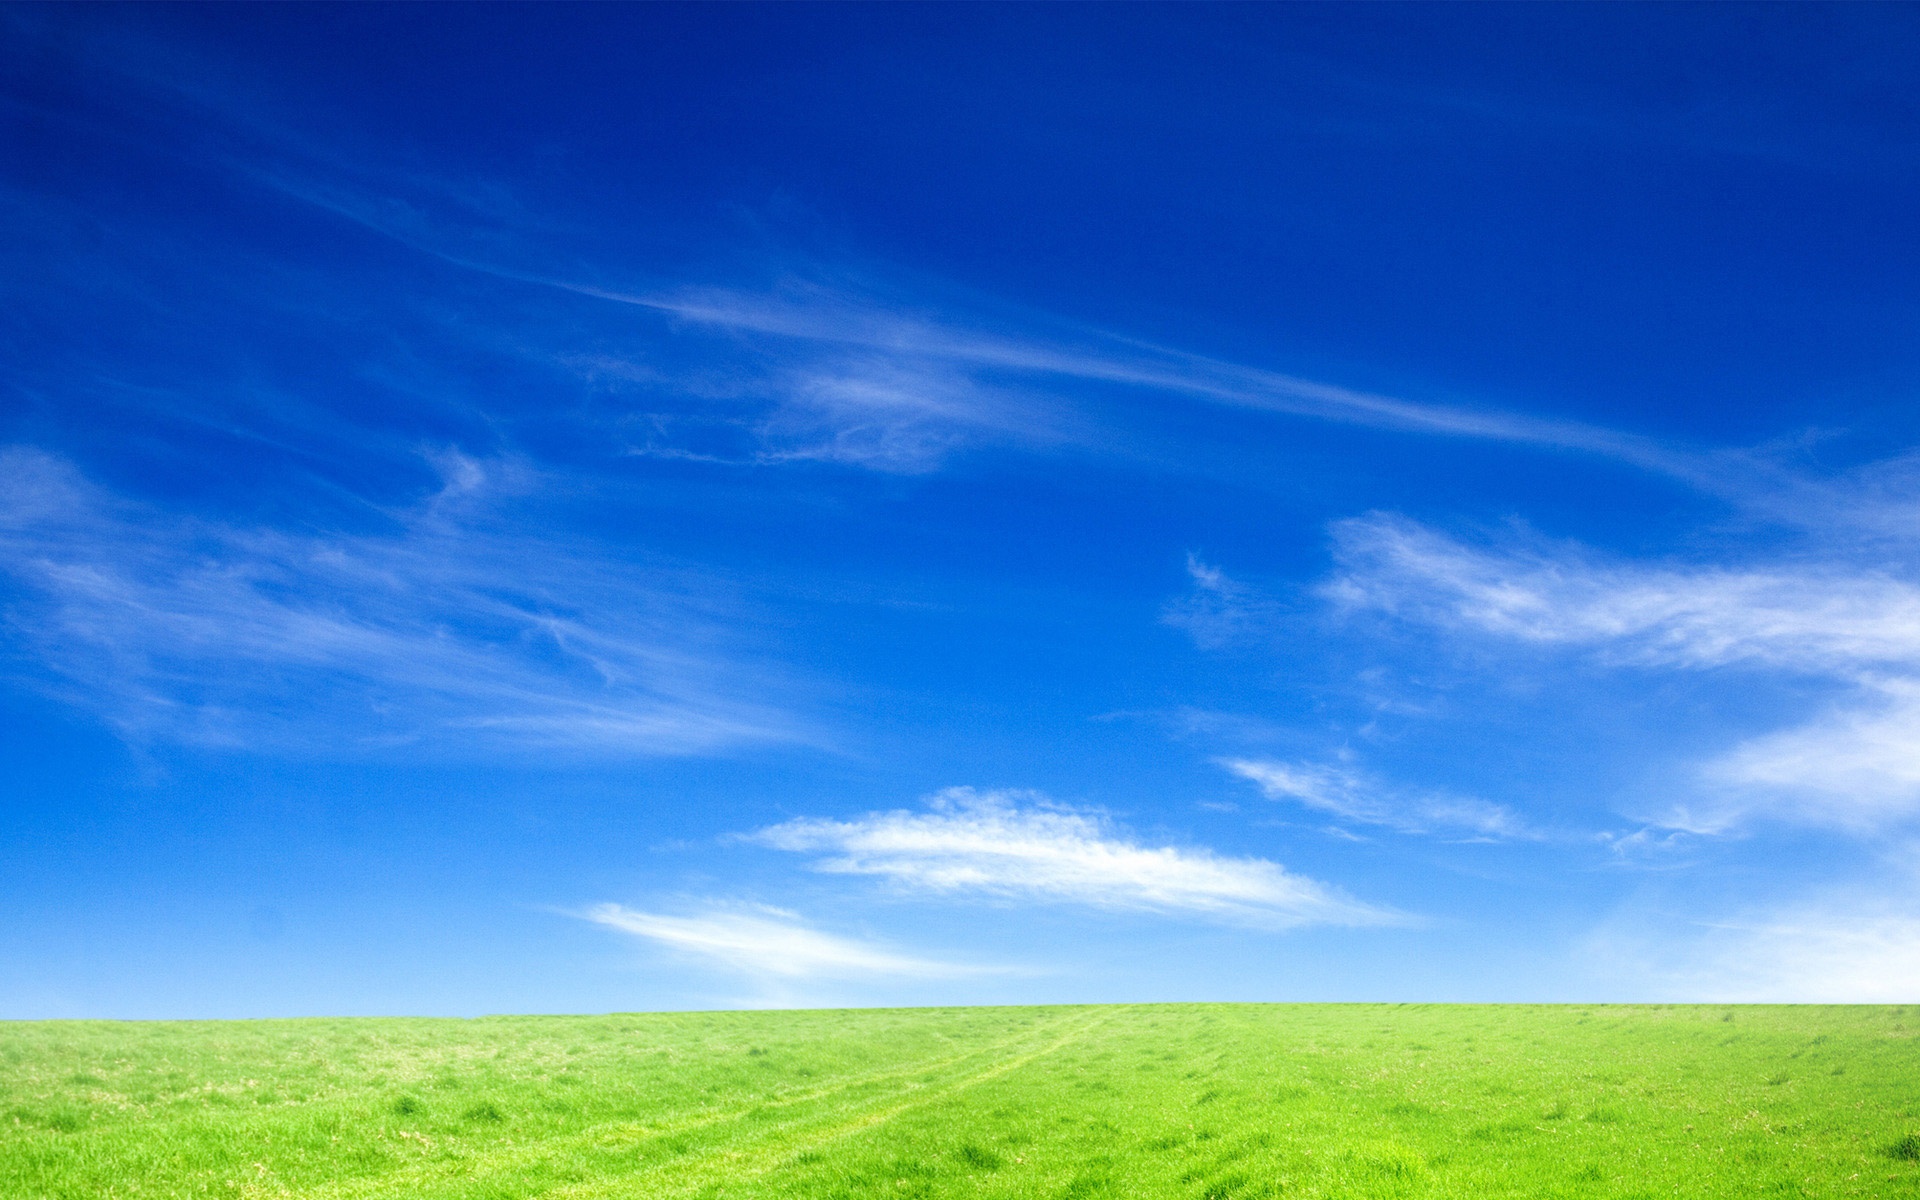 Blue Sky And Green Grass Wallpaper In Jpg Format For